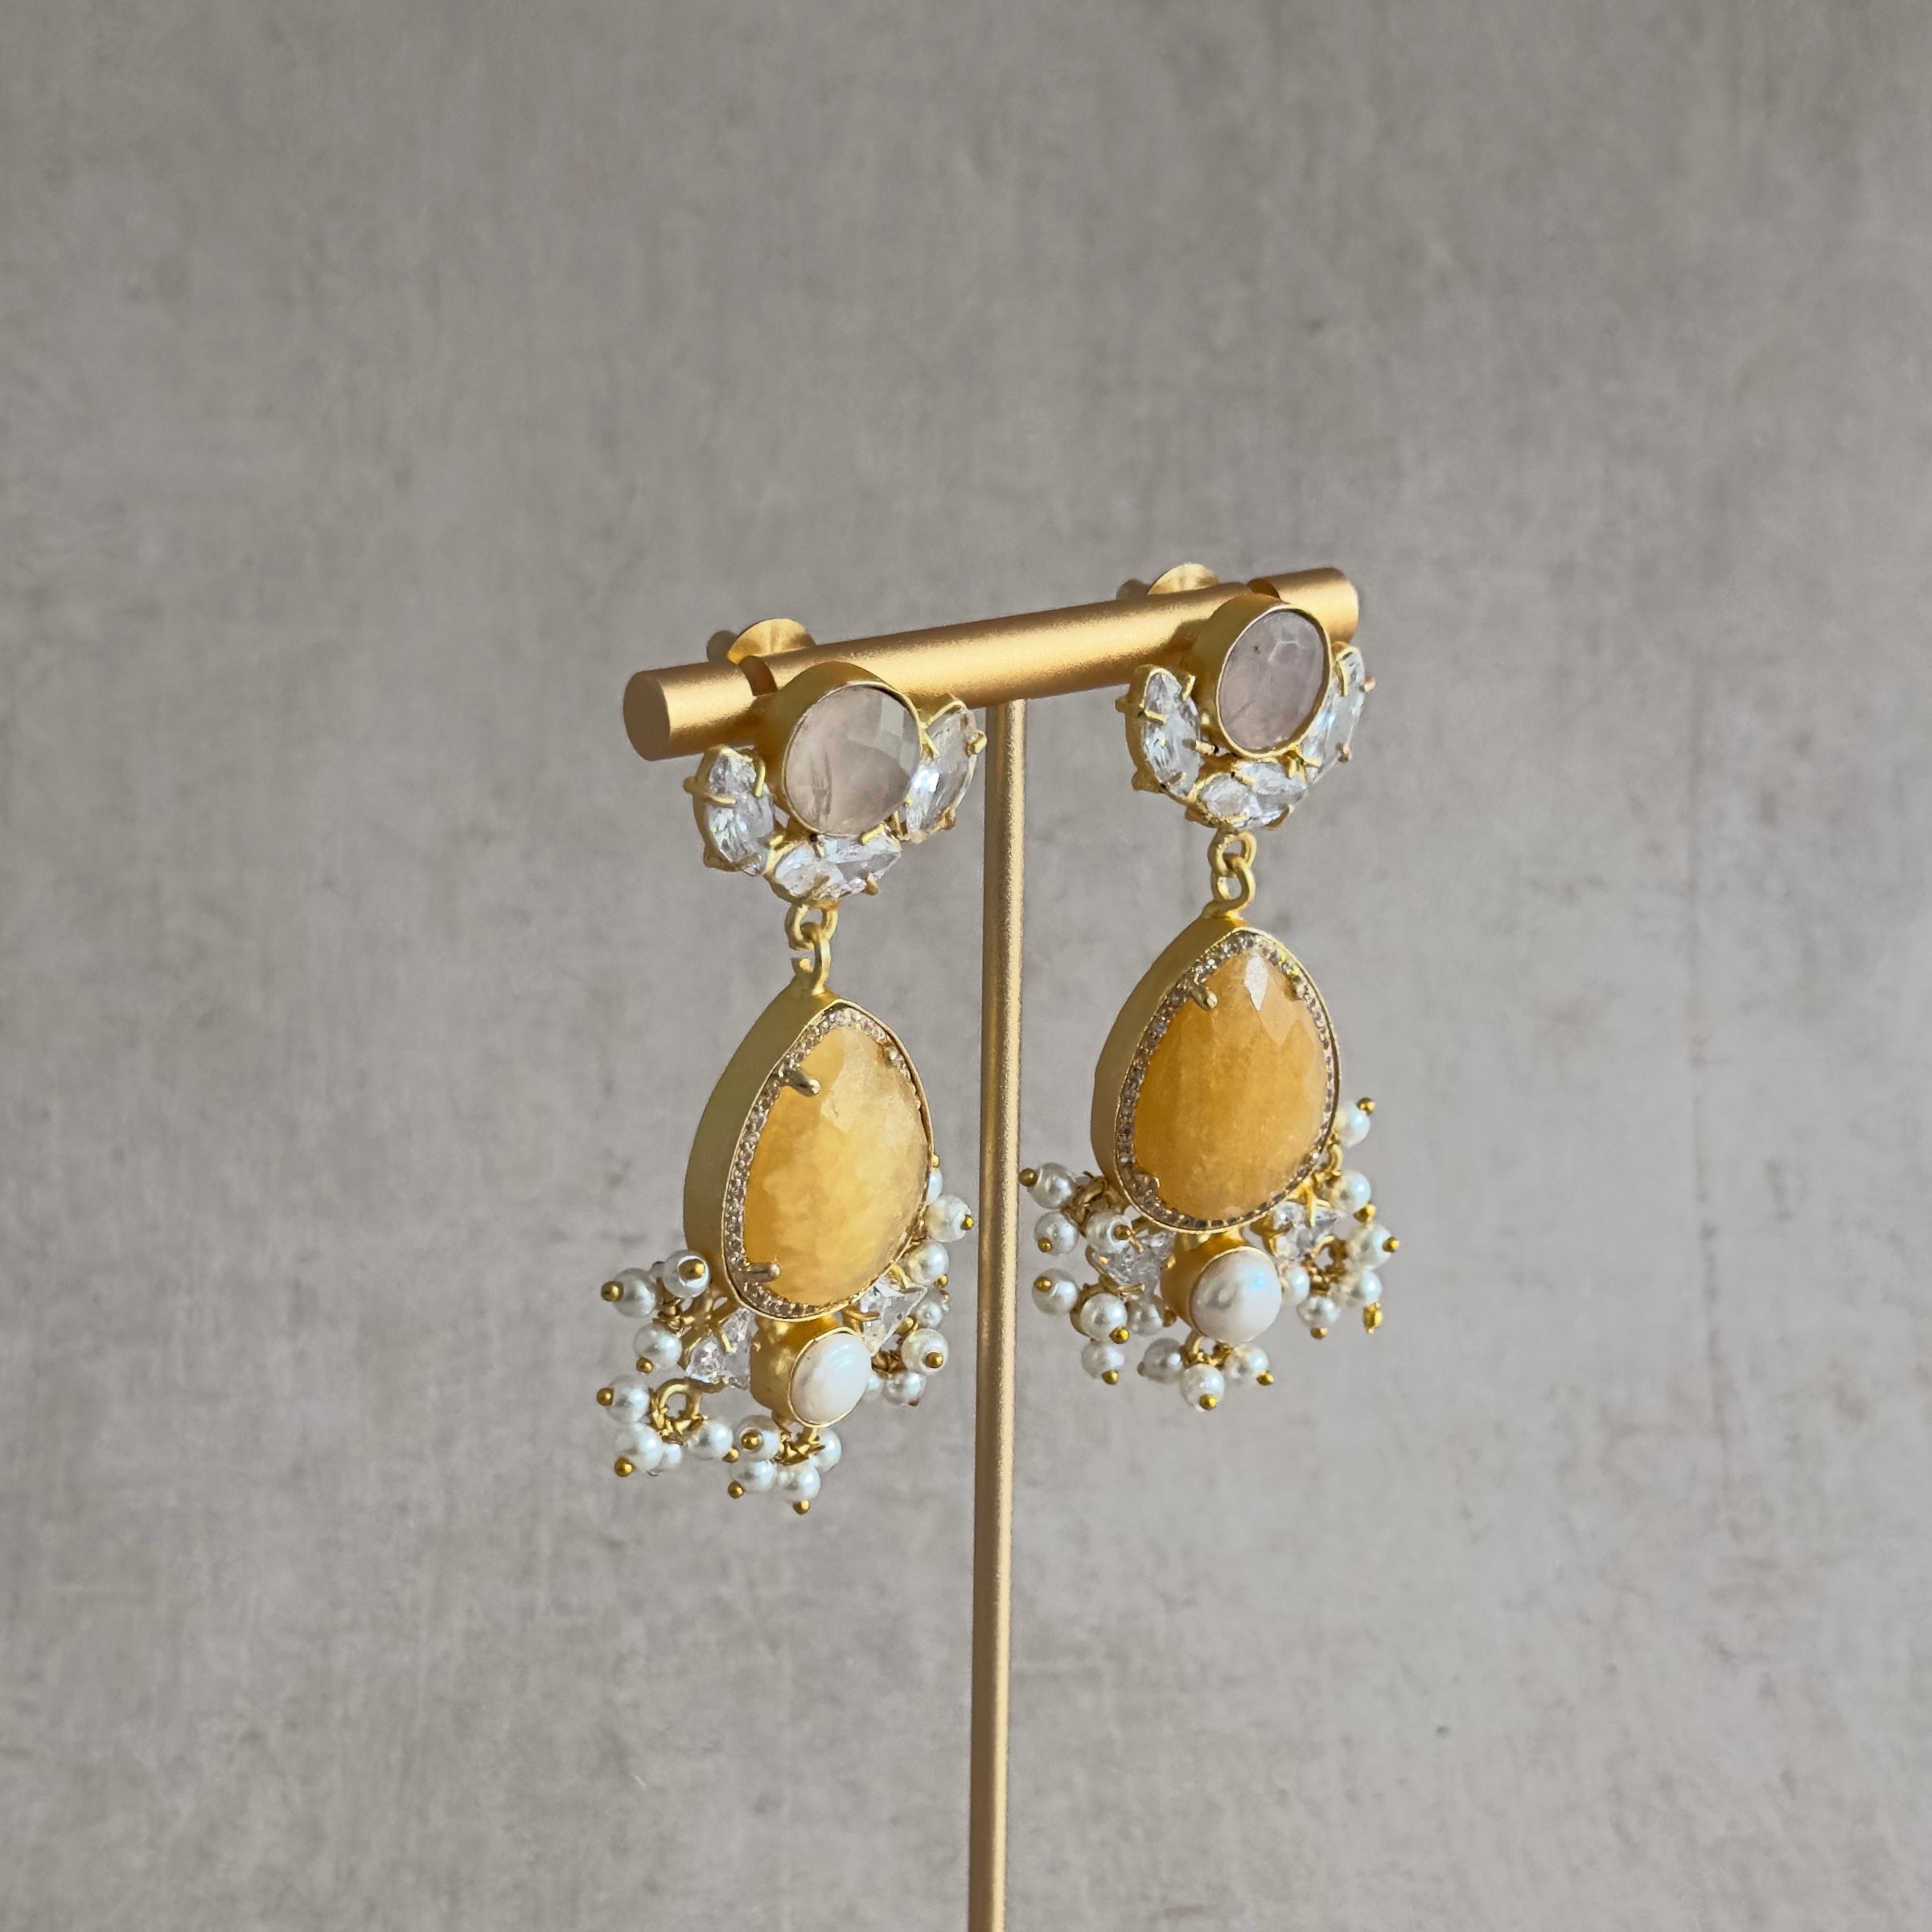 Embrace the summer vibes with our Tamara Melon Drop Earrings! Each earring features a colorful array of gemstones that will add a pop of color to any outfit. The pearl accents provide an elegant touch, making these earrings perfect for any occasion. Get ready to turn heads and elevate your style with these stunning statement earrings!